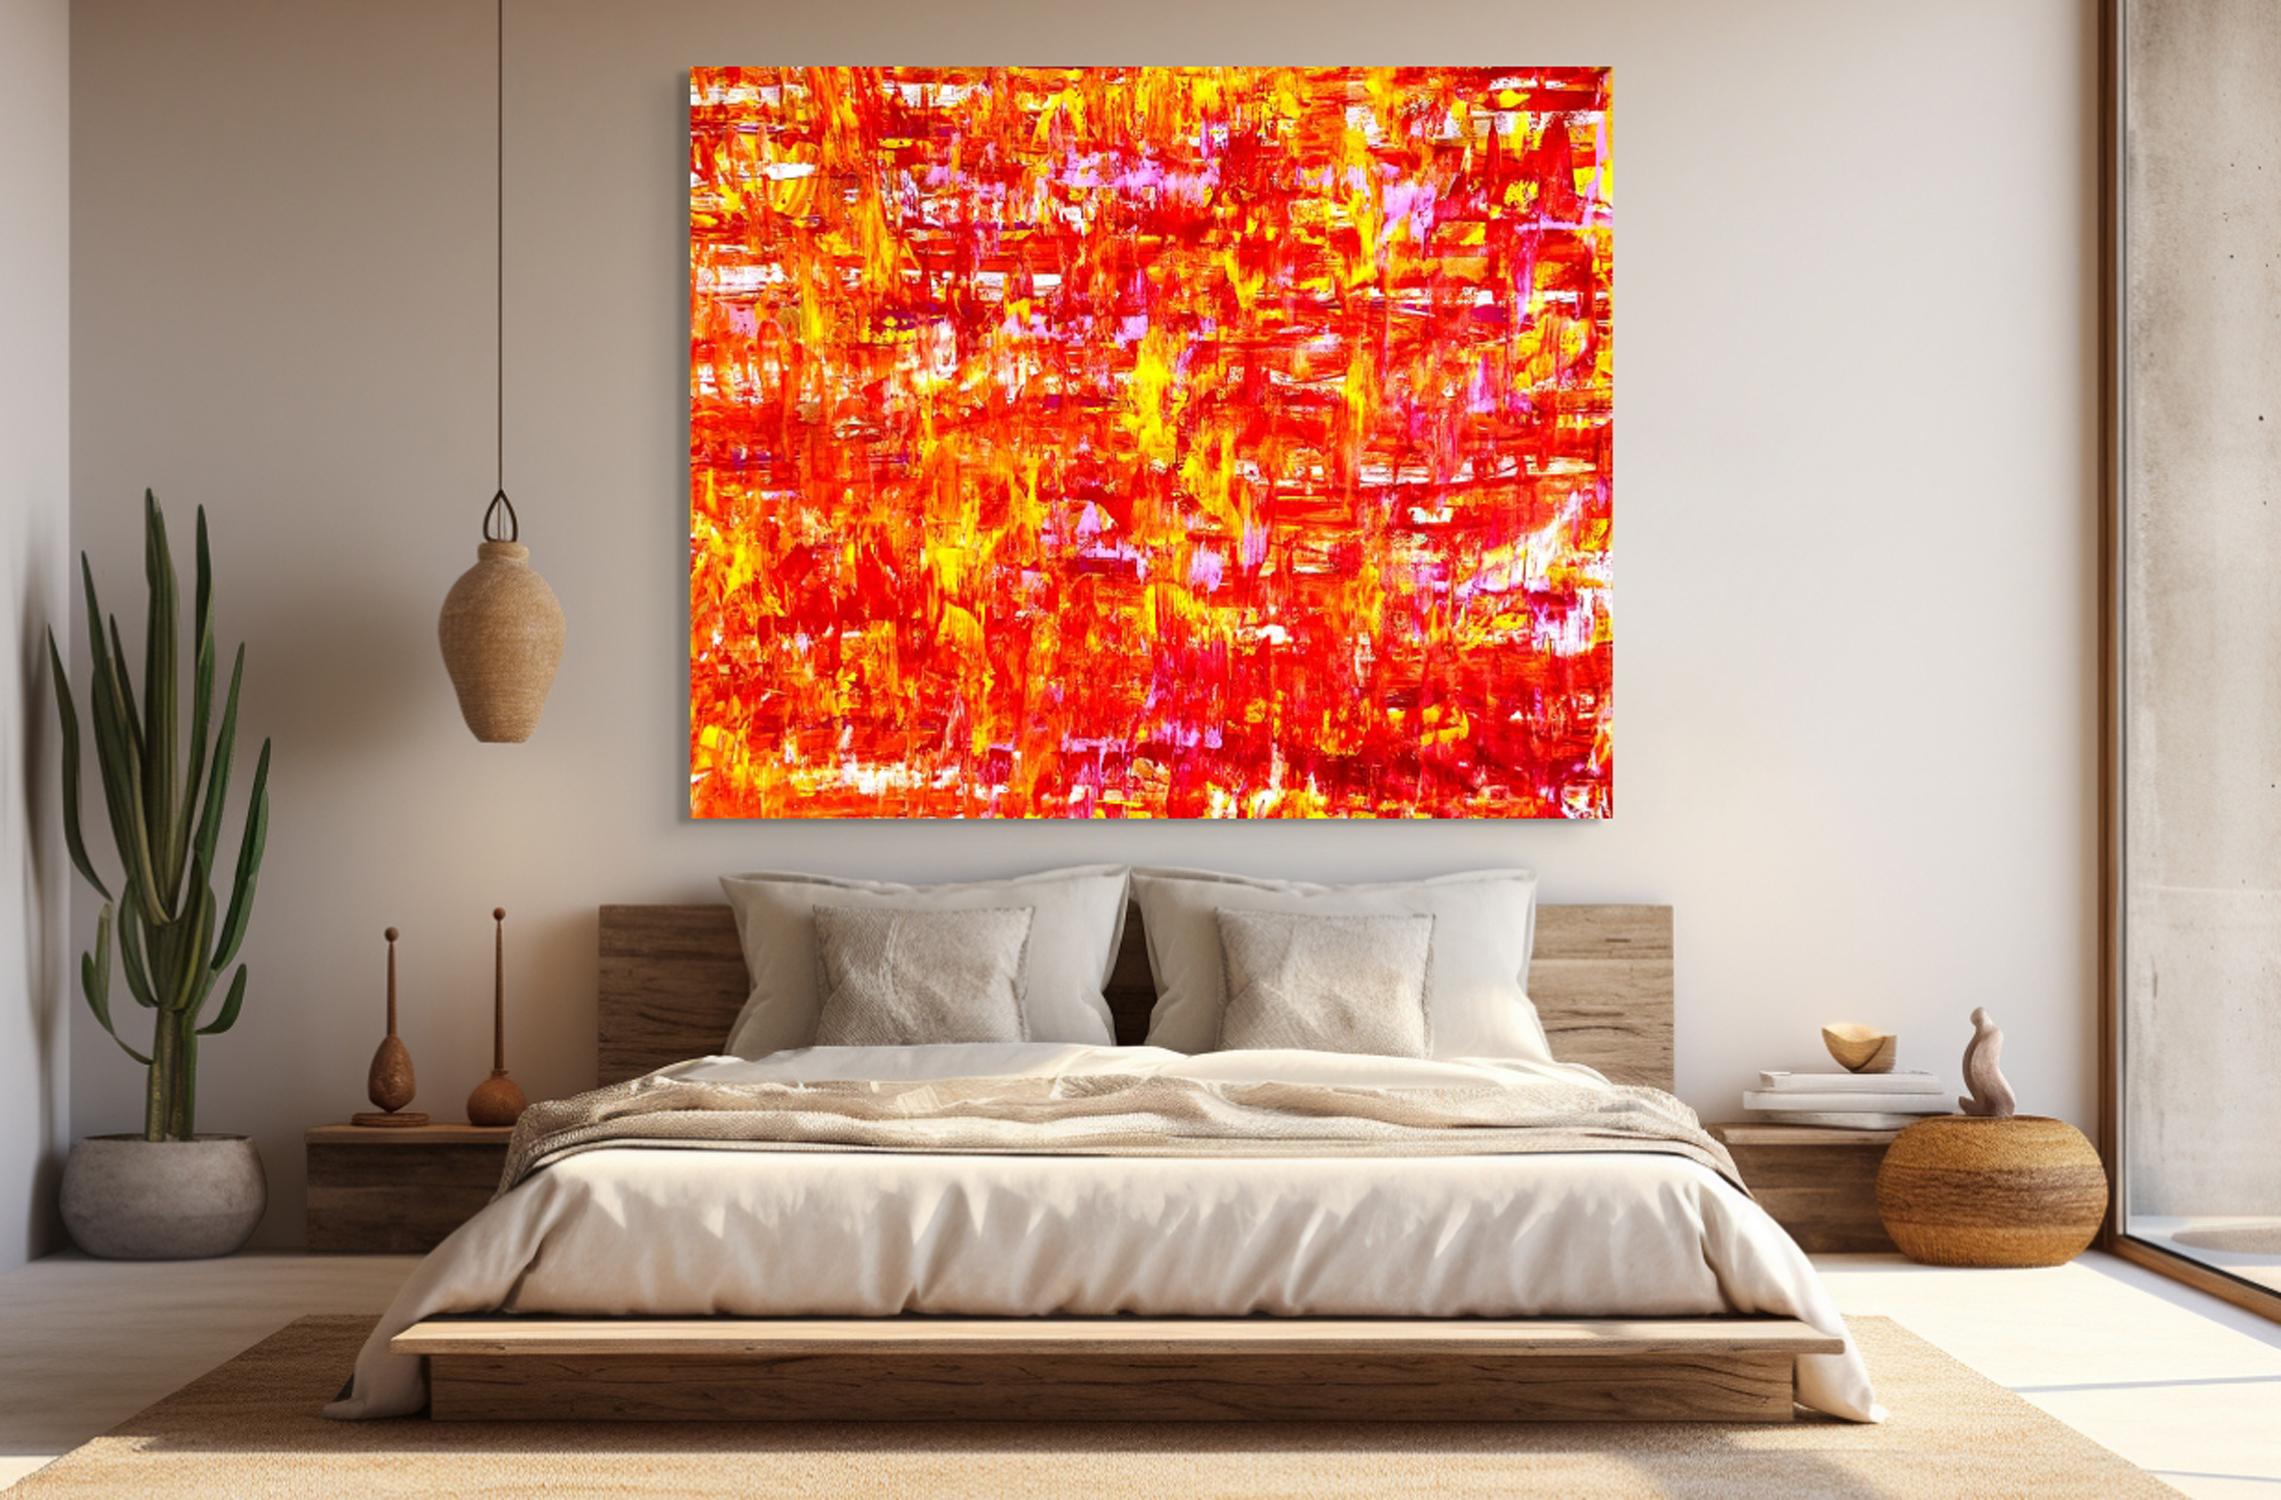 Warming - Abstract Expressionist Painting by Estelle Asmodelle